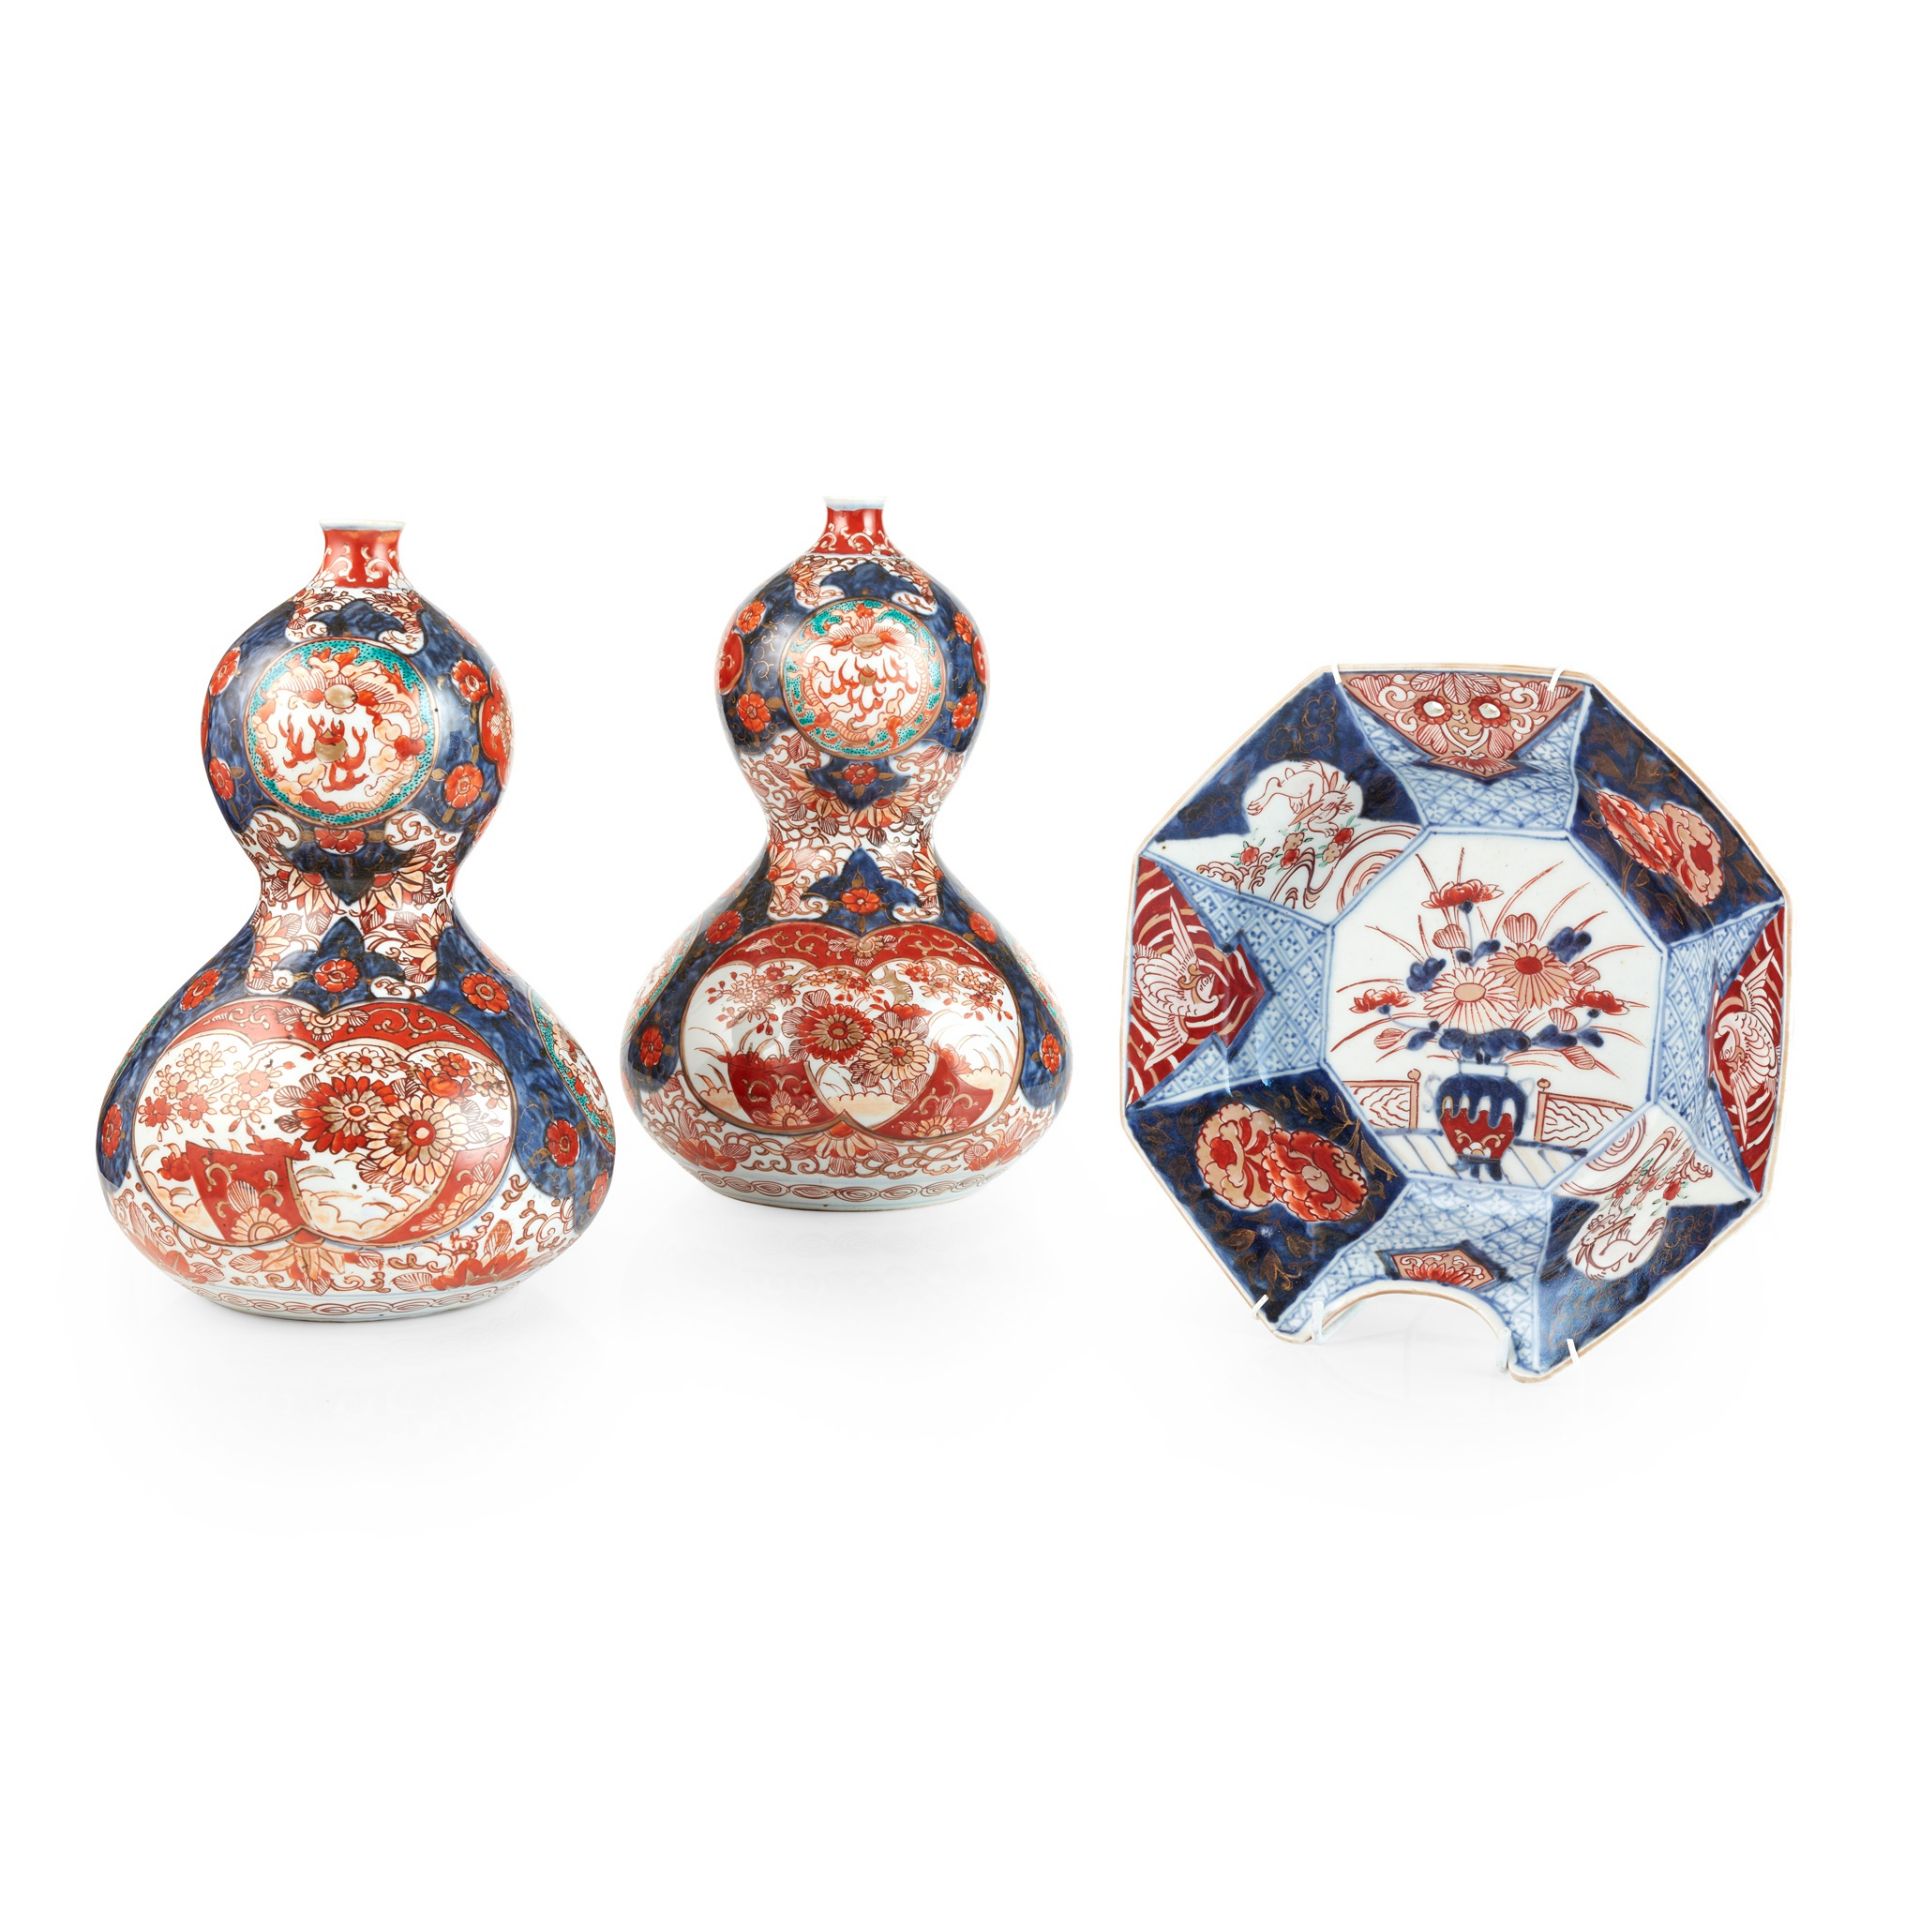 (A PRIVATE SCOTTISH COLLECTION) GROUP OF THREE IMARI WARES MEIJI PERIOD